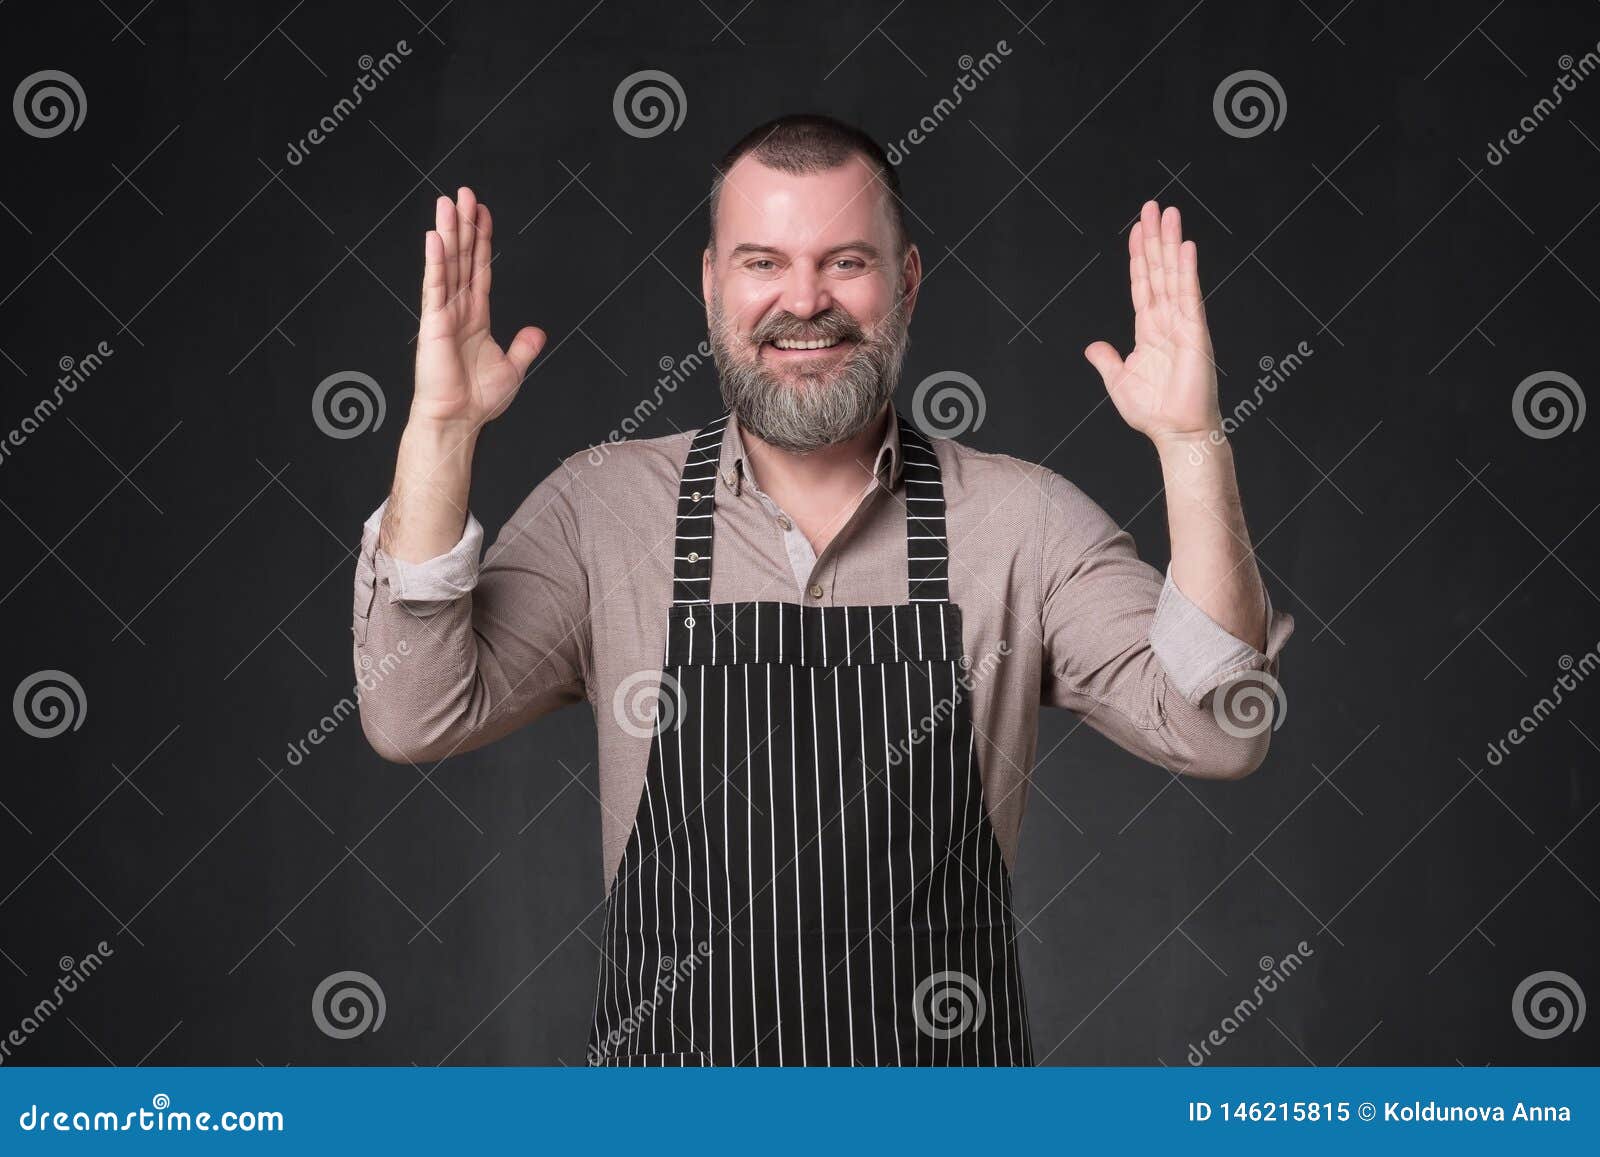 Mature Bearded Man In Apron Bragging About The Big Size Of Something Stock Image Image Of 